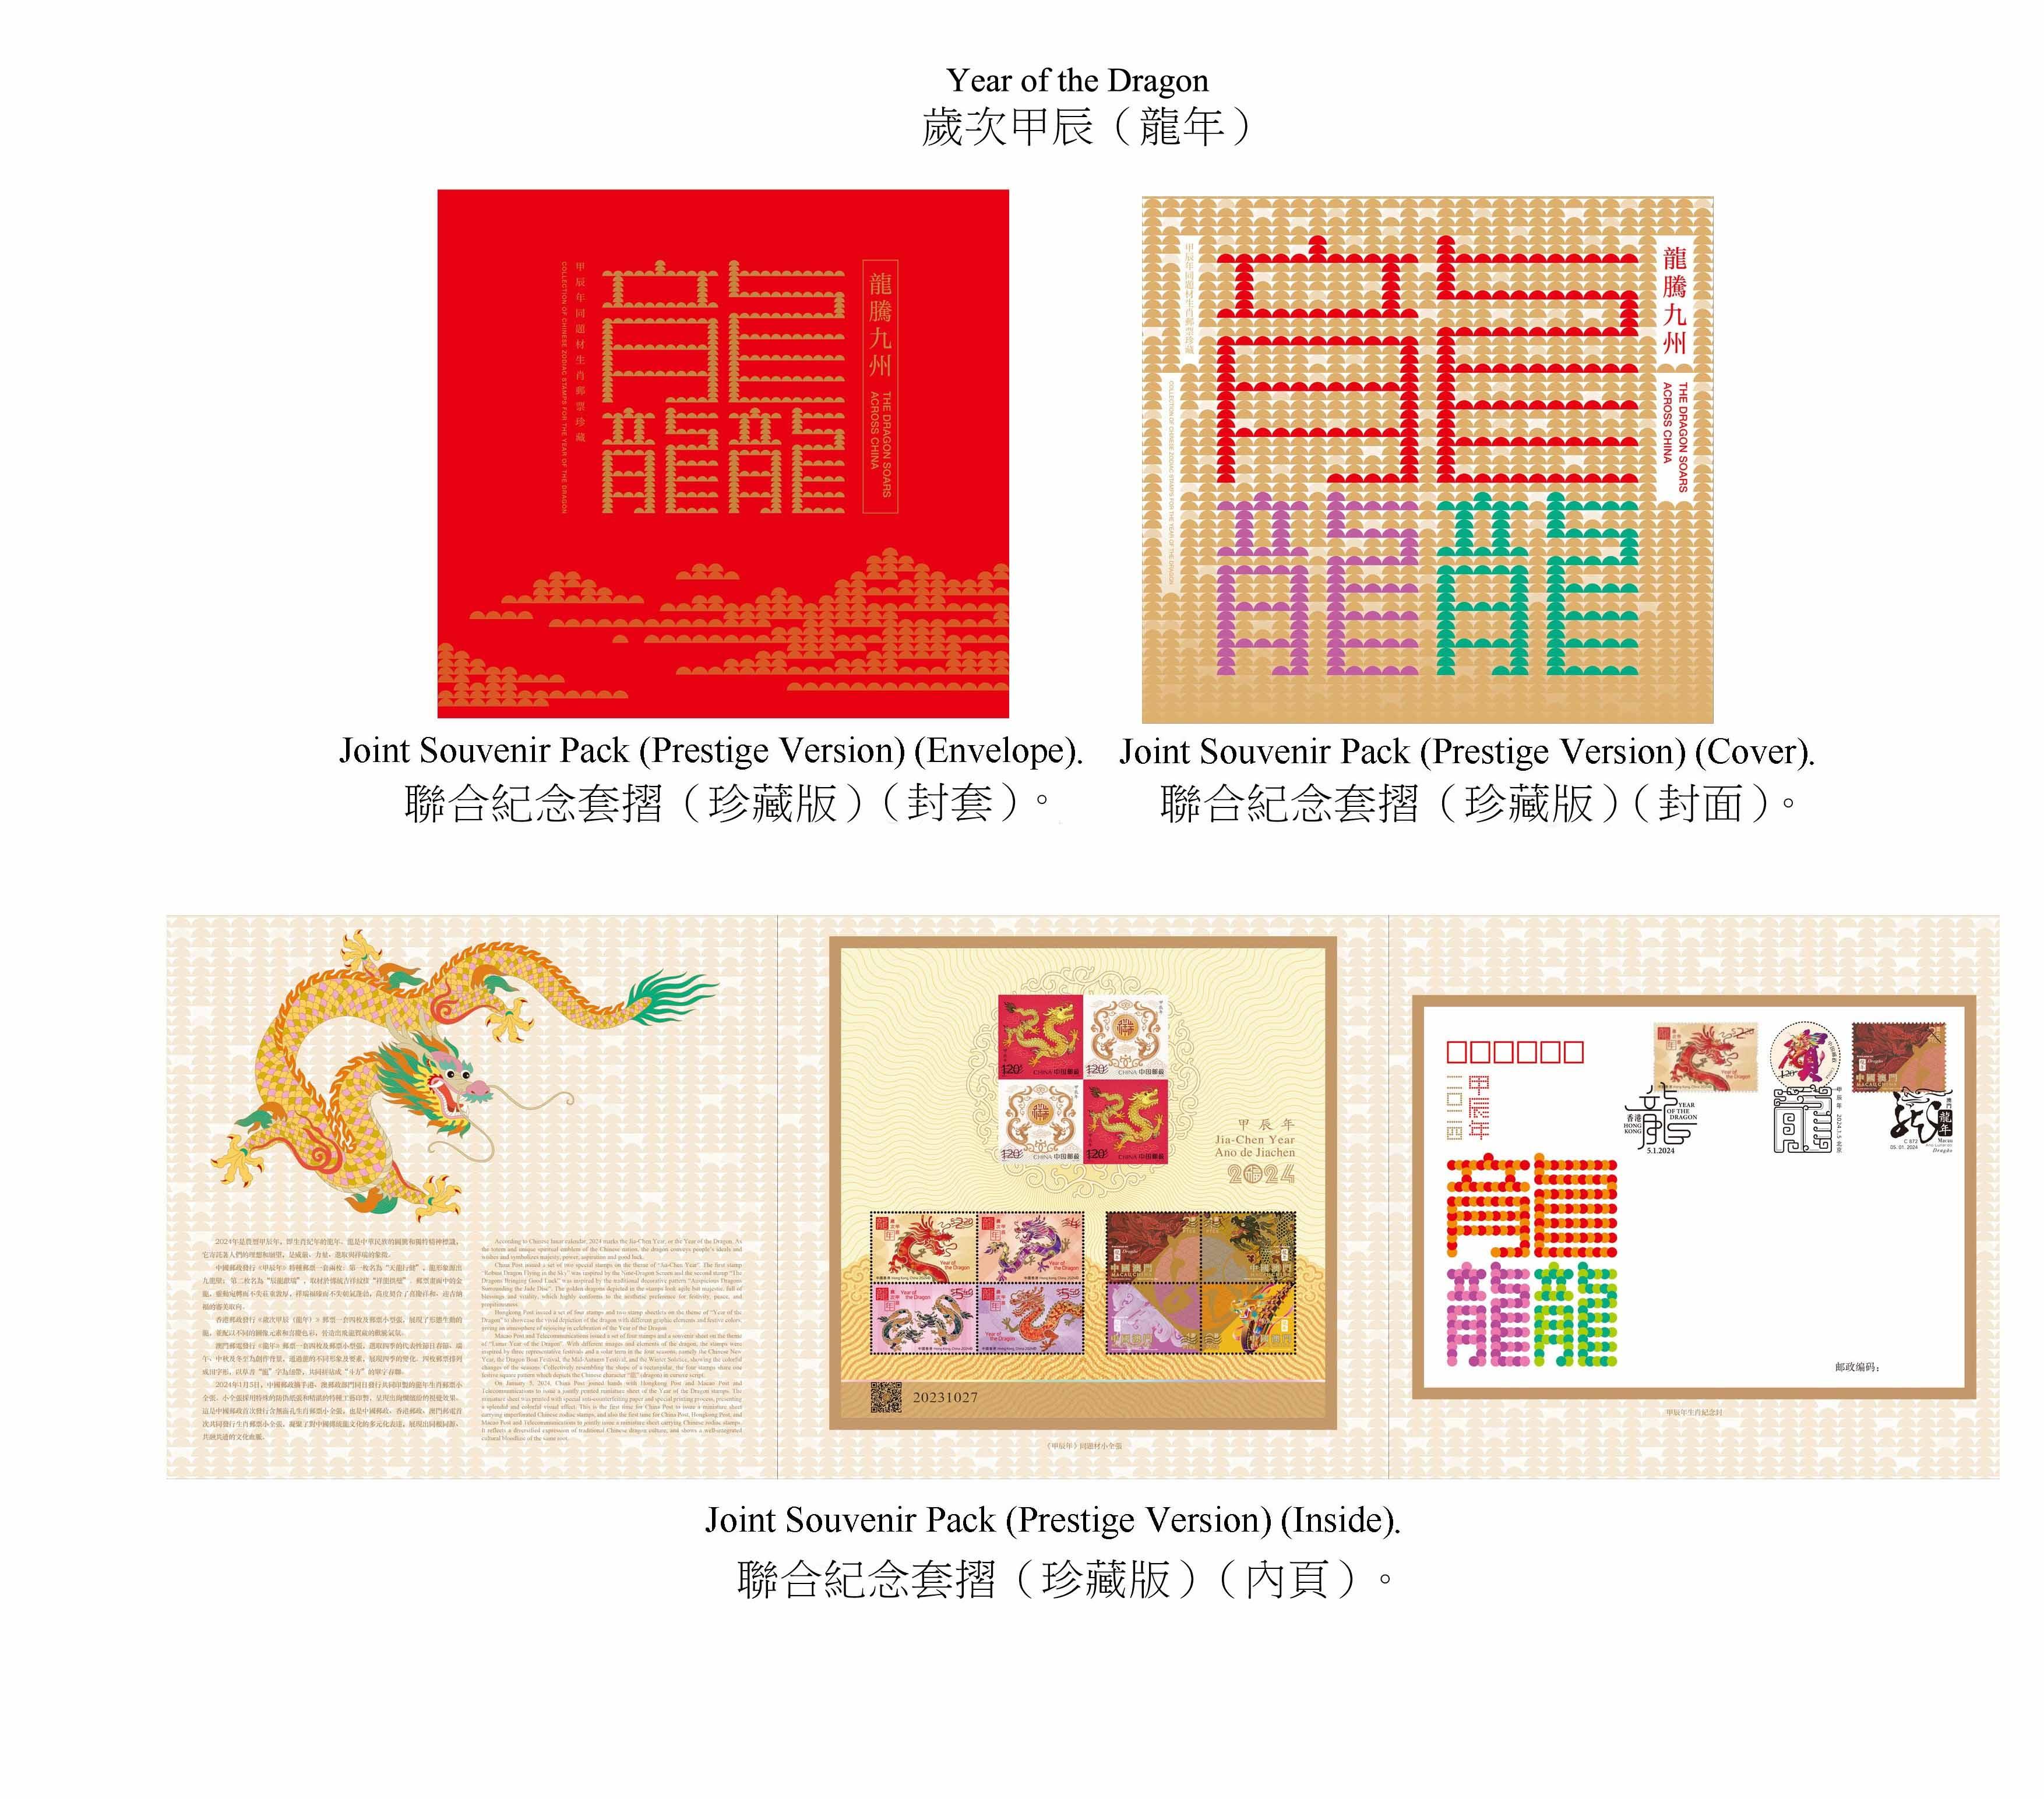 Hongkong Post will launch a special stamp issue and associated philatelic products on the theme of "Year of the Dragon" on January 5, 2024 (Friday). Photos show the joint souvenir pack (prestige version) jointly presented by China Post, Hongkong Post and Macao Post and Telecommunications.
